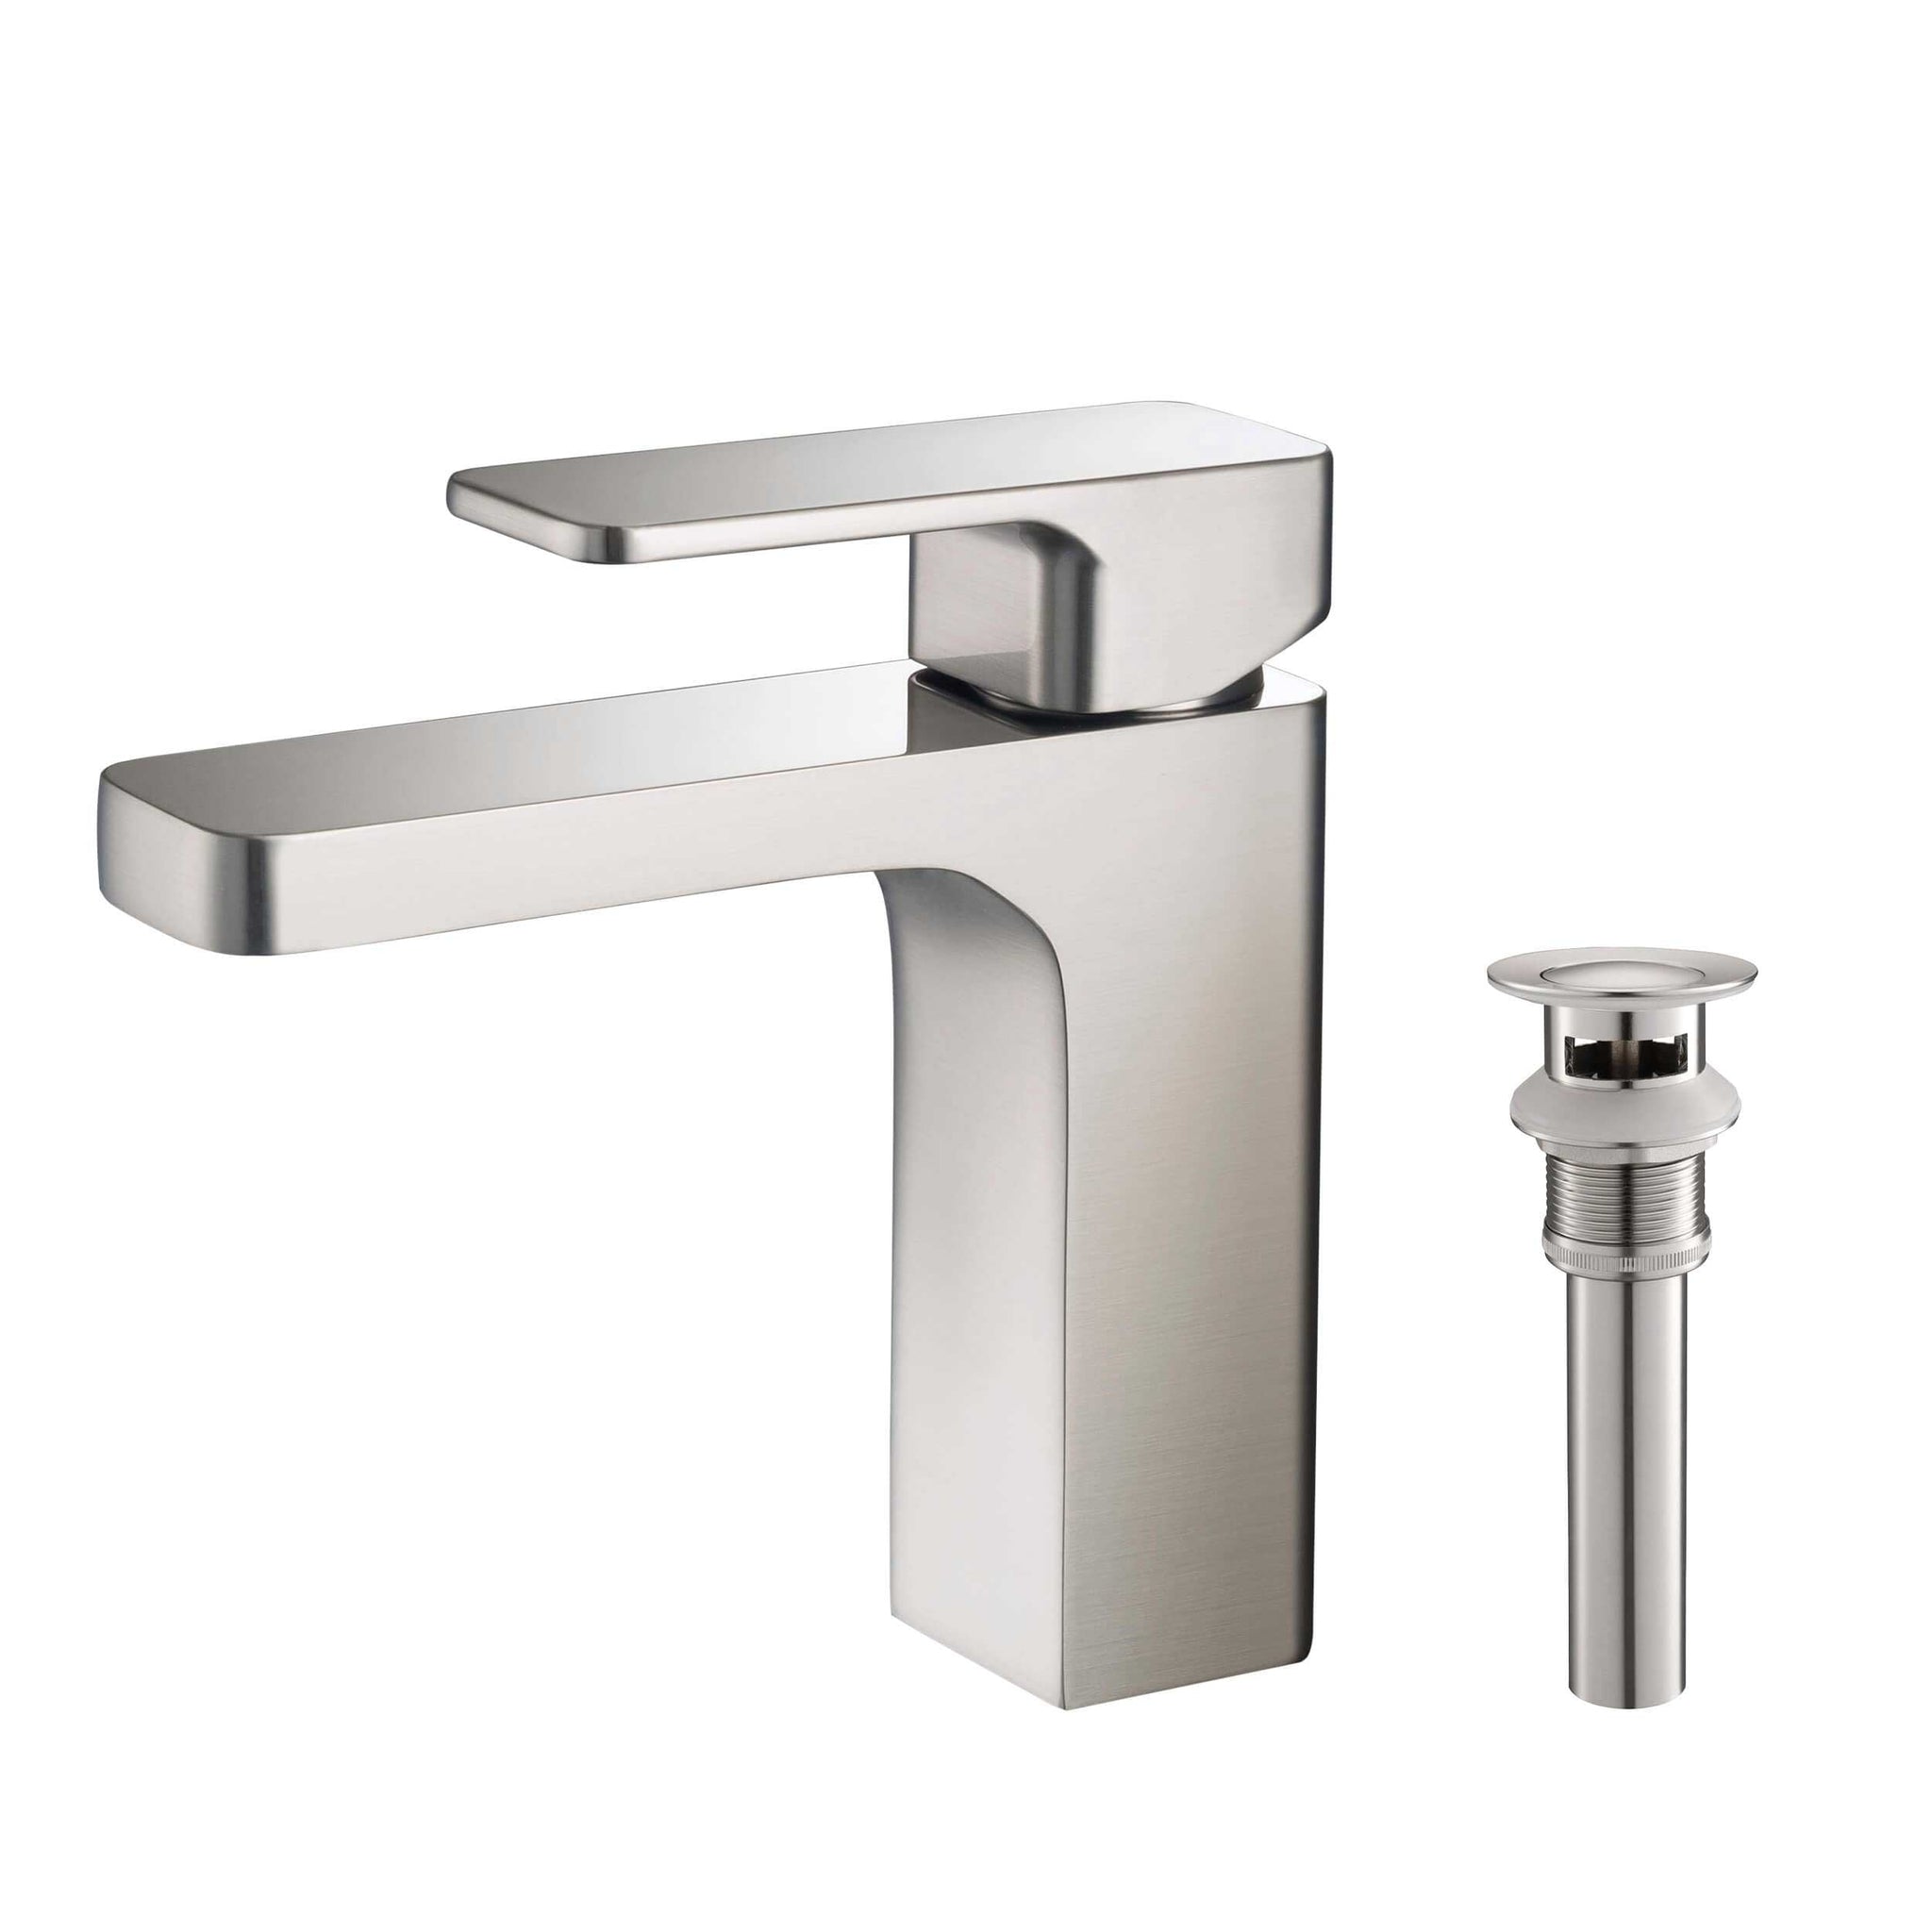 KIBI, KIBI Blaze Single Handle Brushed Nickel Solid Brass Bathroom Sink Faucet With Pop-Up Drain Stopper Small Cover With Overflow